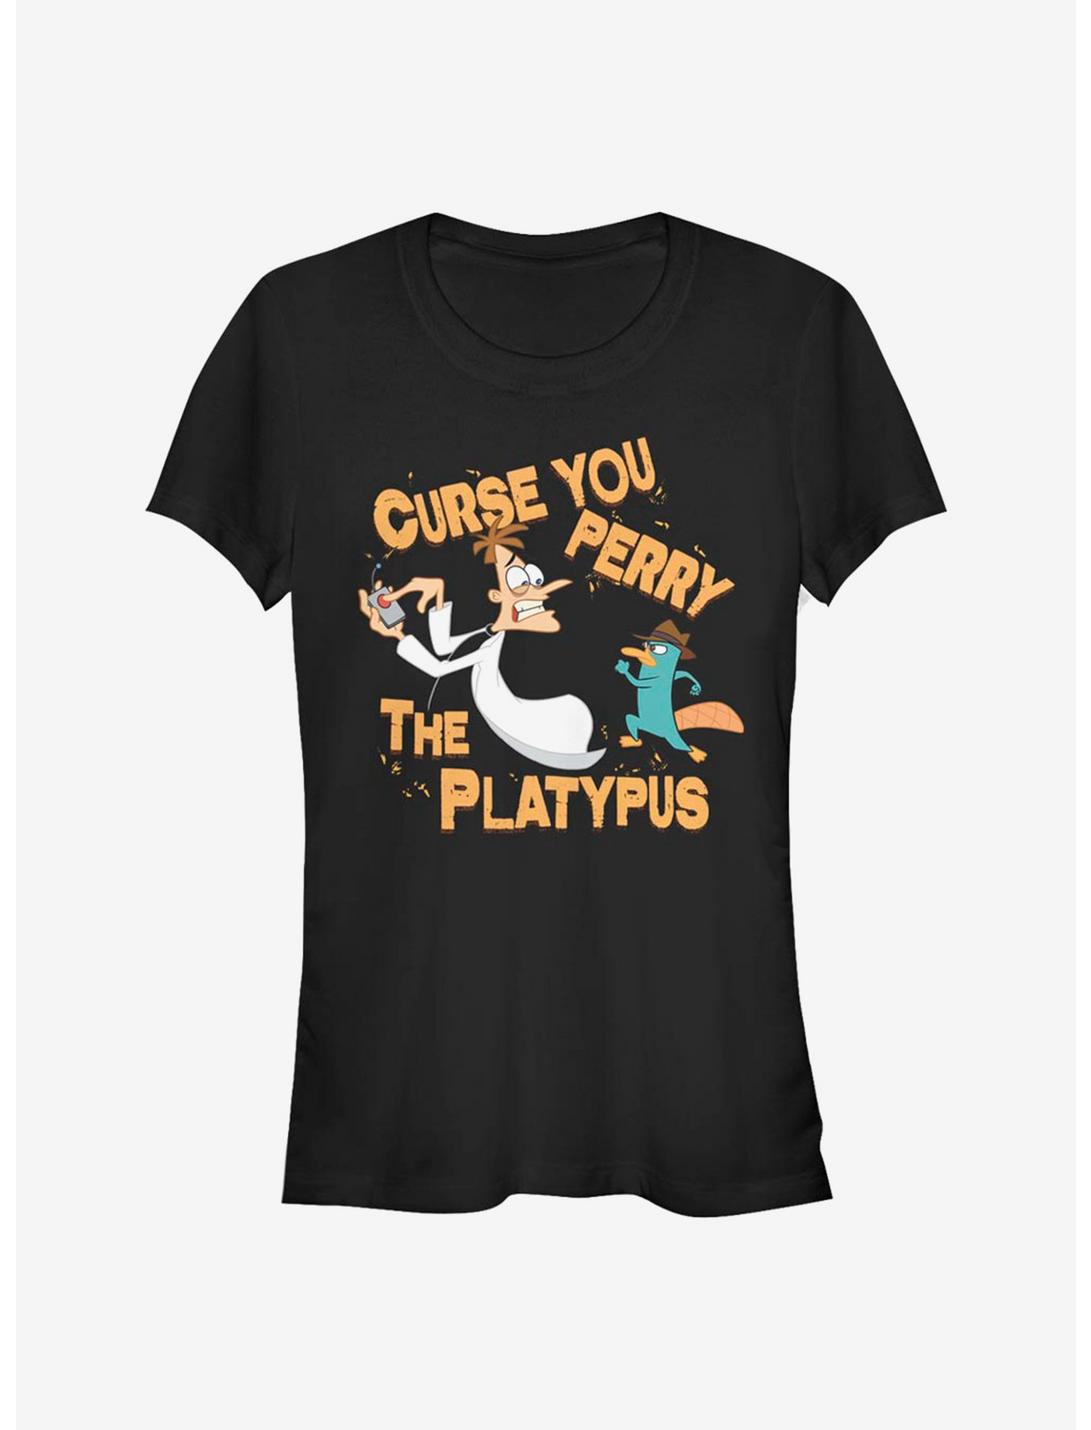 Disney Phineas And Ferb Curse You Girls T-Shirt, BLACK, hi-res